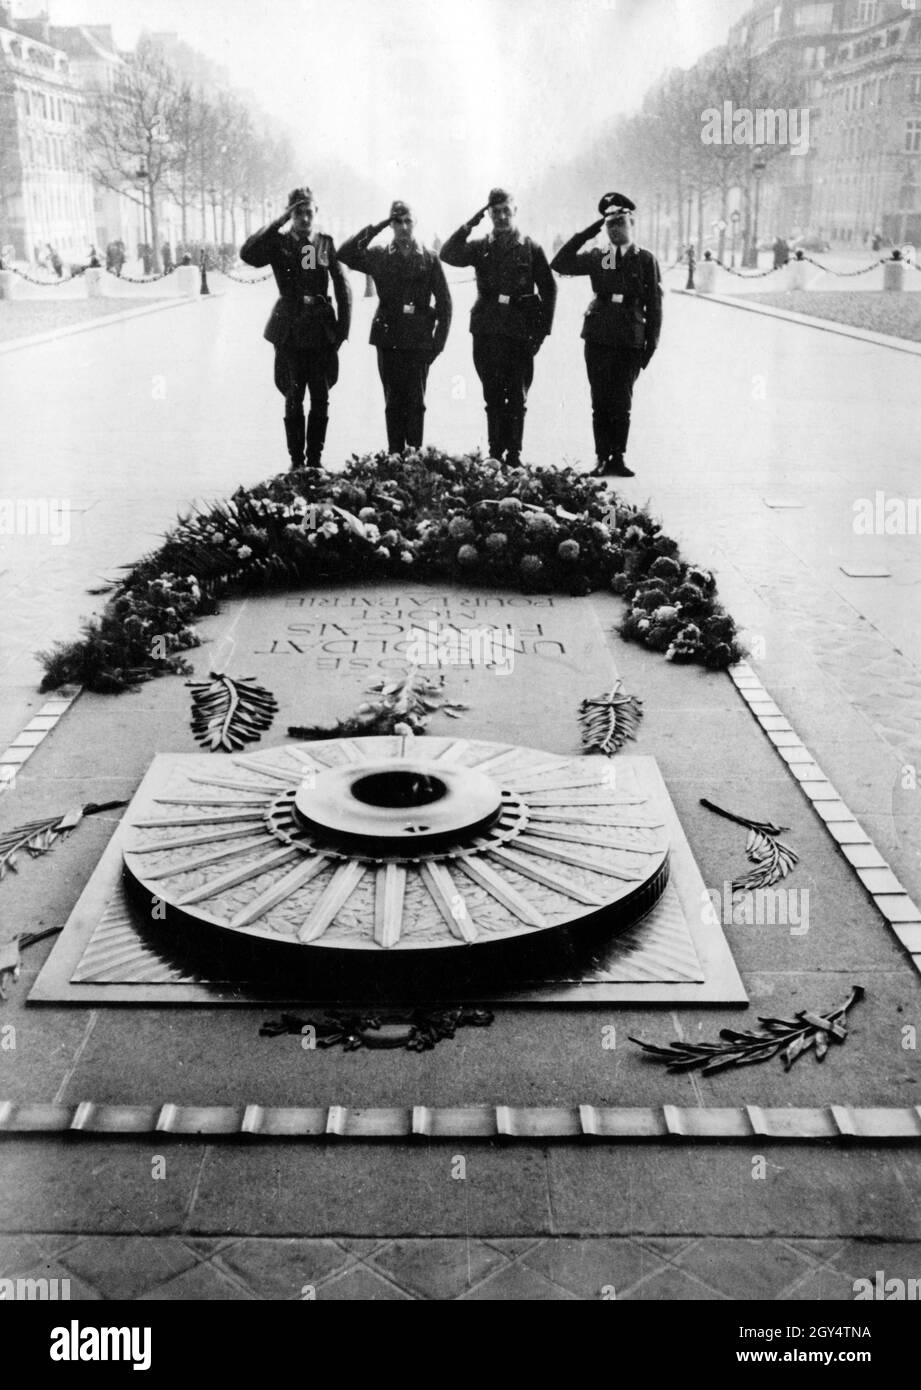 Soldiers of the German Wehrmacht salute at the Tomb of the Unknown Soldier under the Arc de Triumph in Paris. [automated translation] Stock Photo